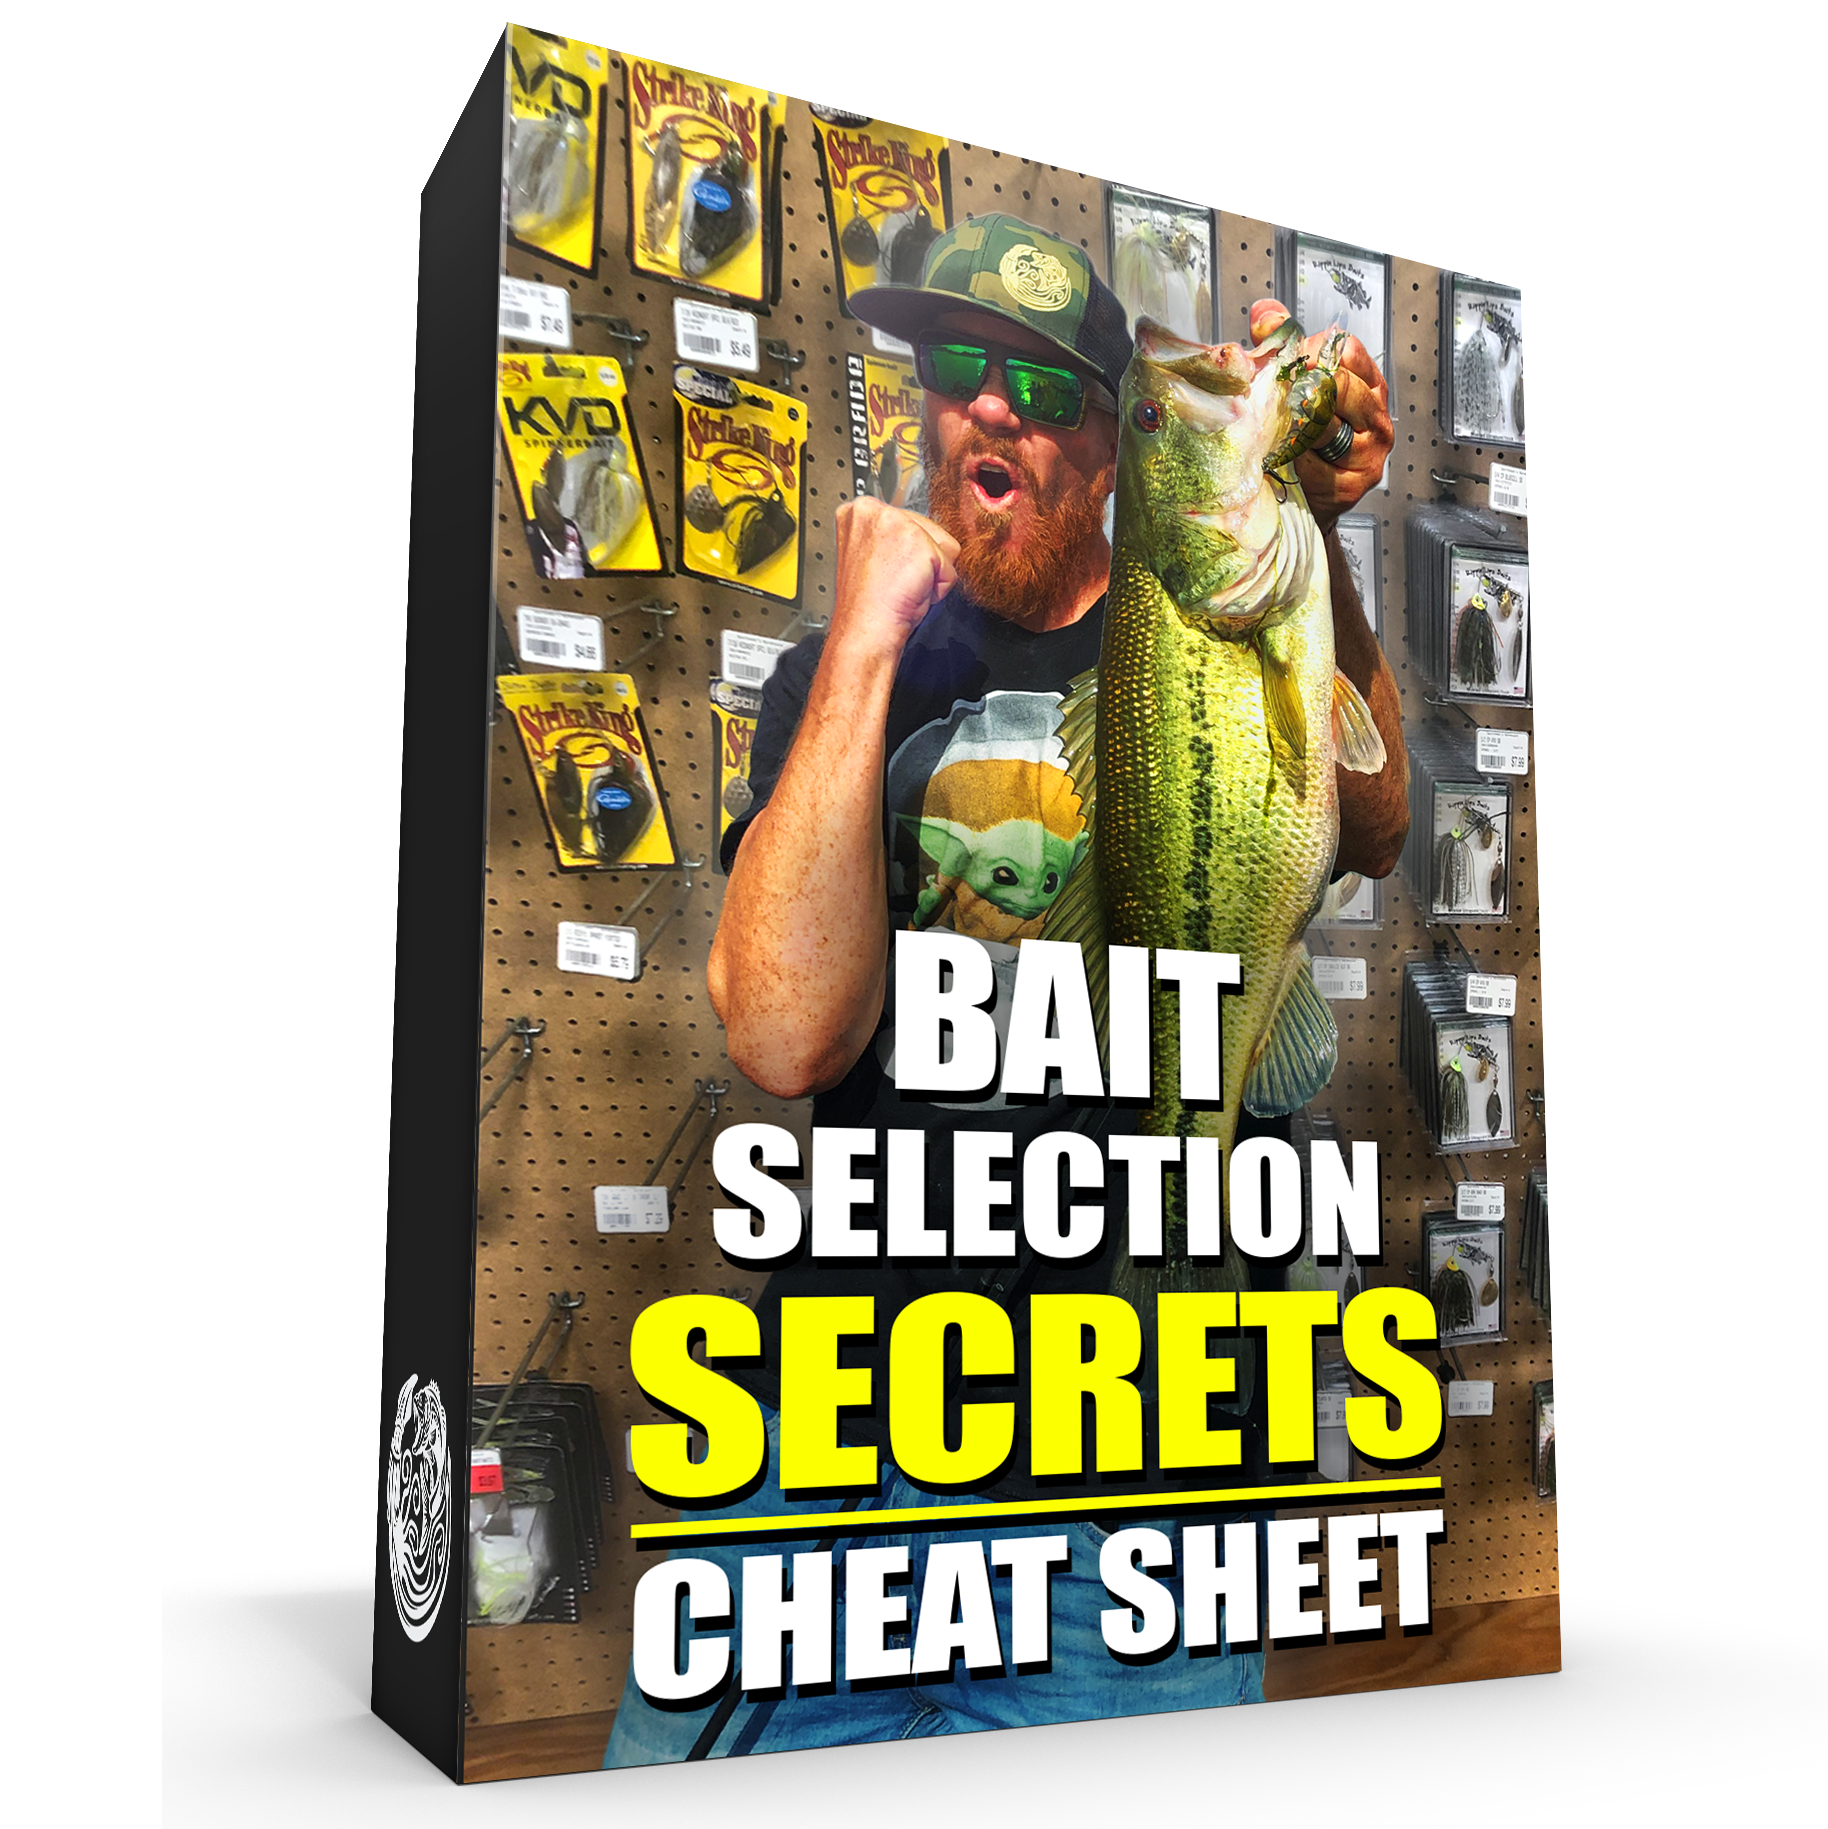 Kraken Bass - You Can Avoid Wasting Countless Hours Bass Fishing By Using  This Chart To Pick the Right Lure Color Every Time. Here's your chance to  get it FREE! ---->